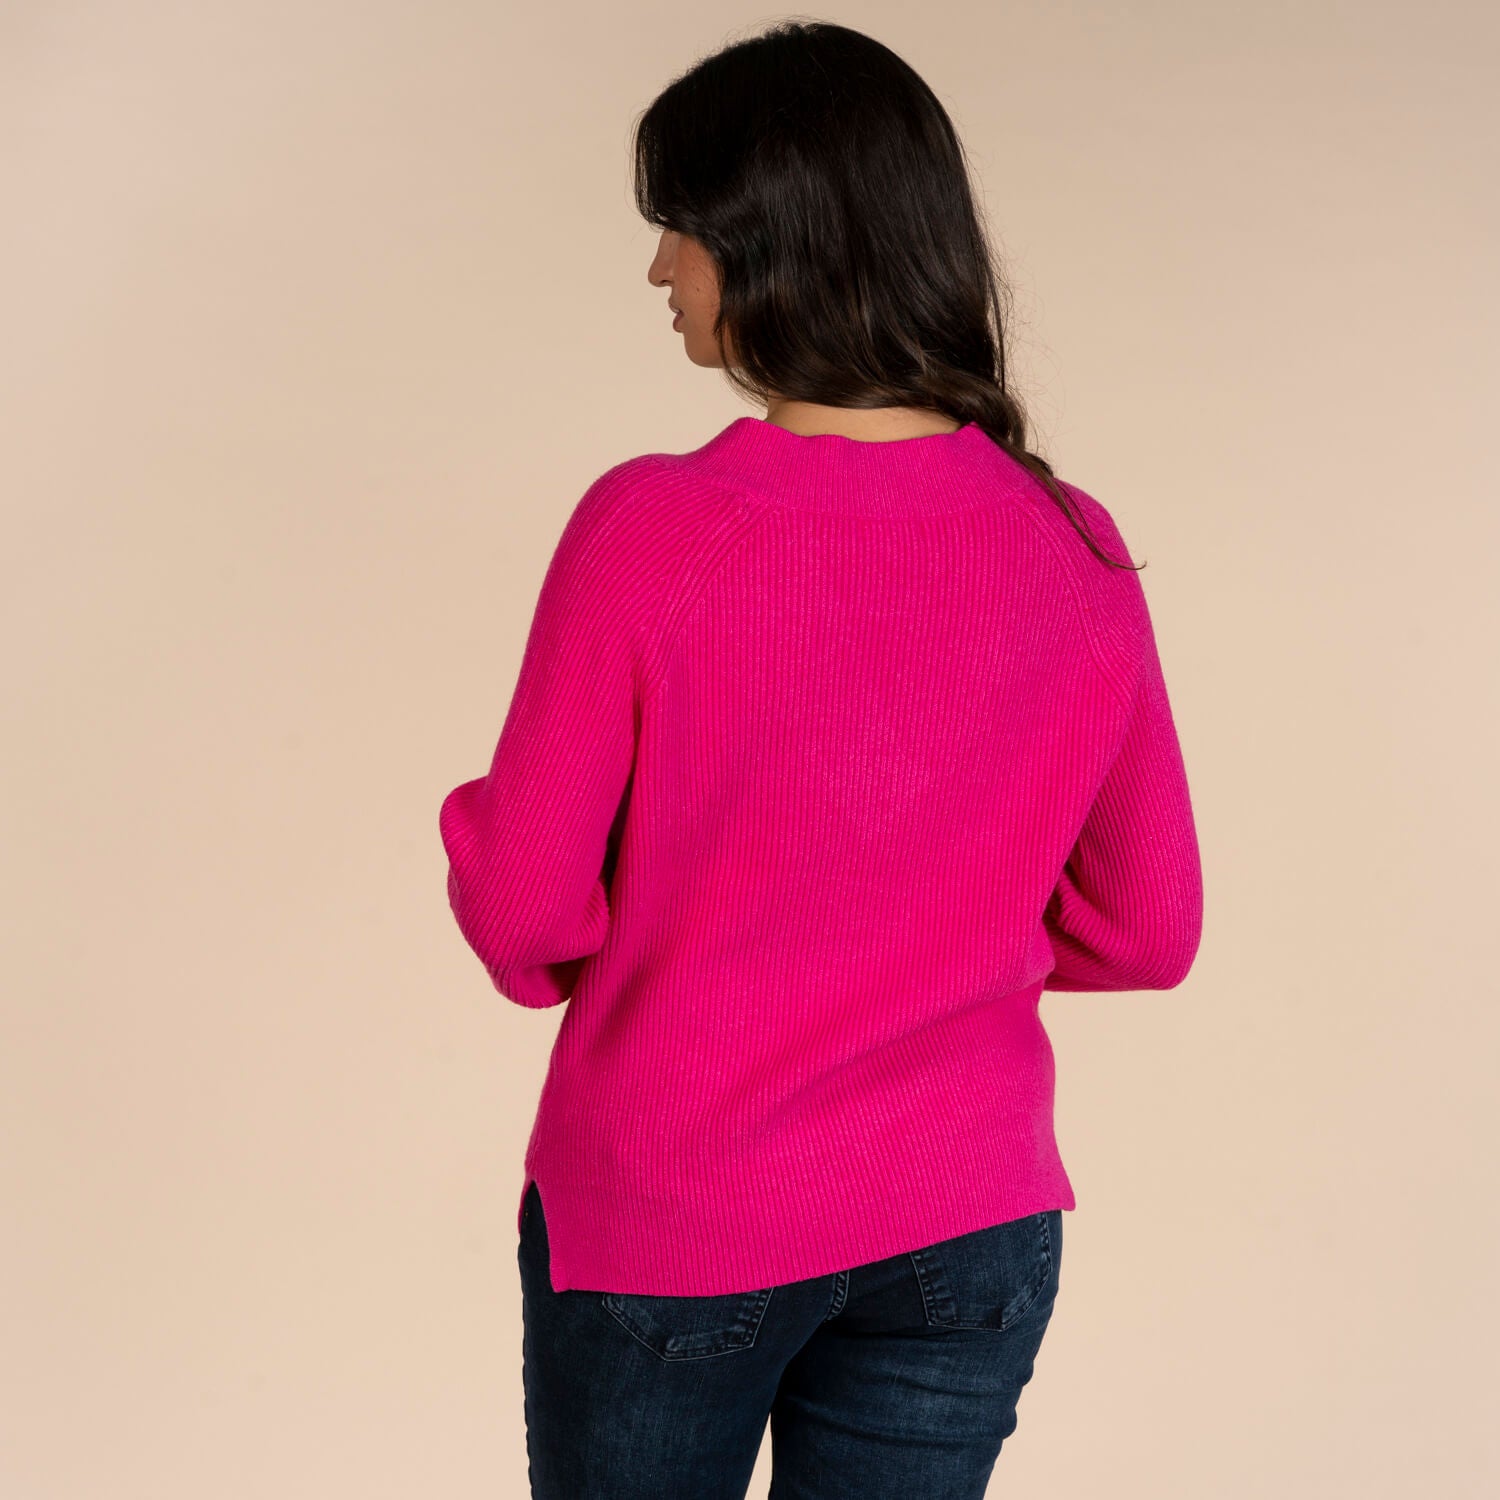 Naoise V-Sweater Sweater - Pink 2 Shaws Department Stores